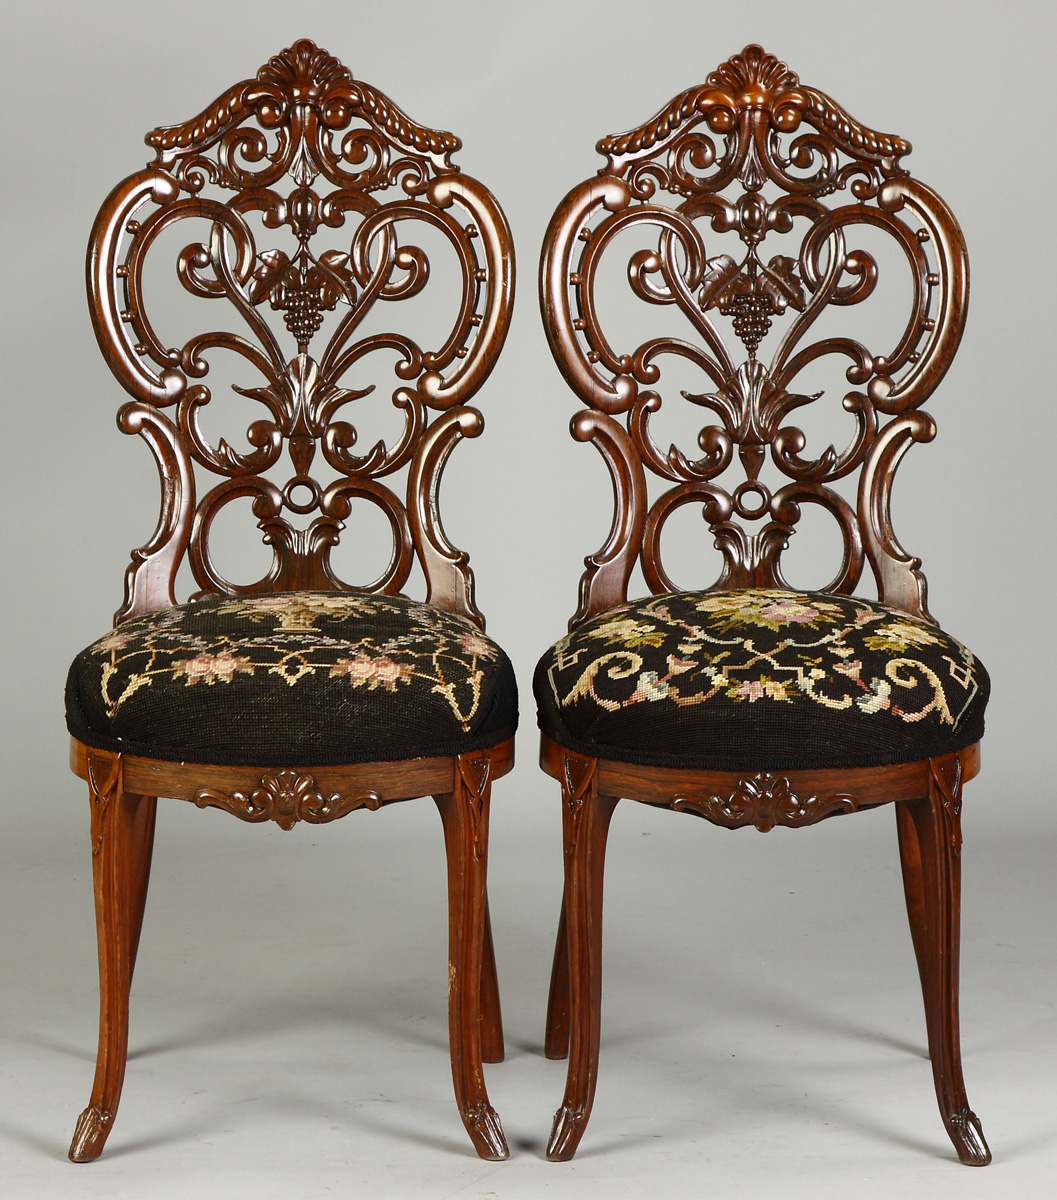 2 Meeks Side Chairs 19th cent.